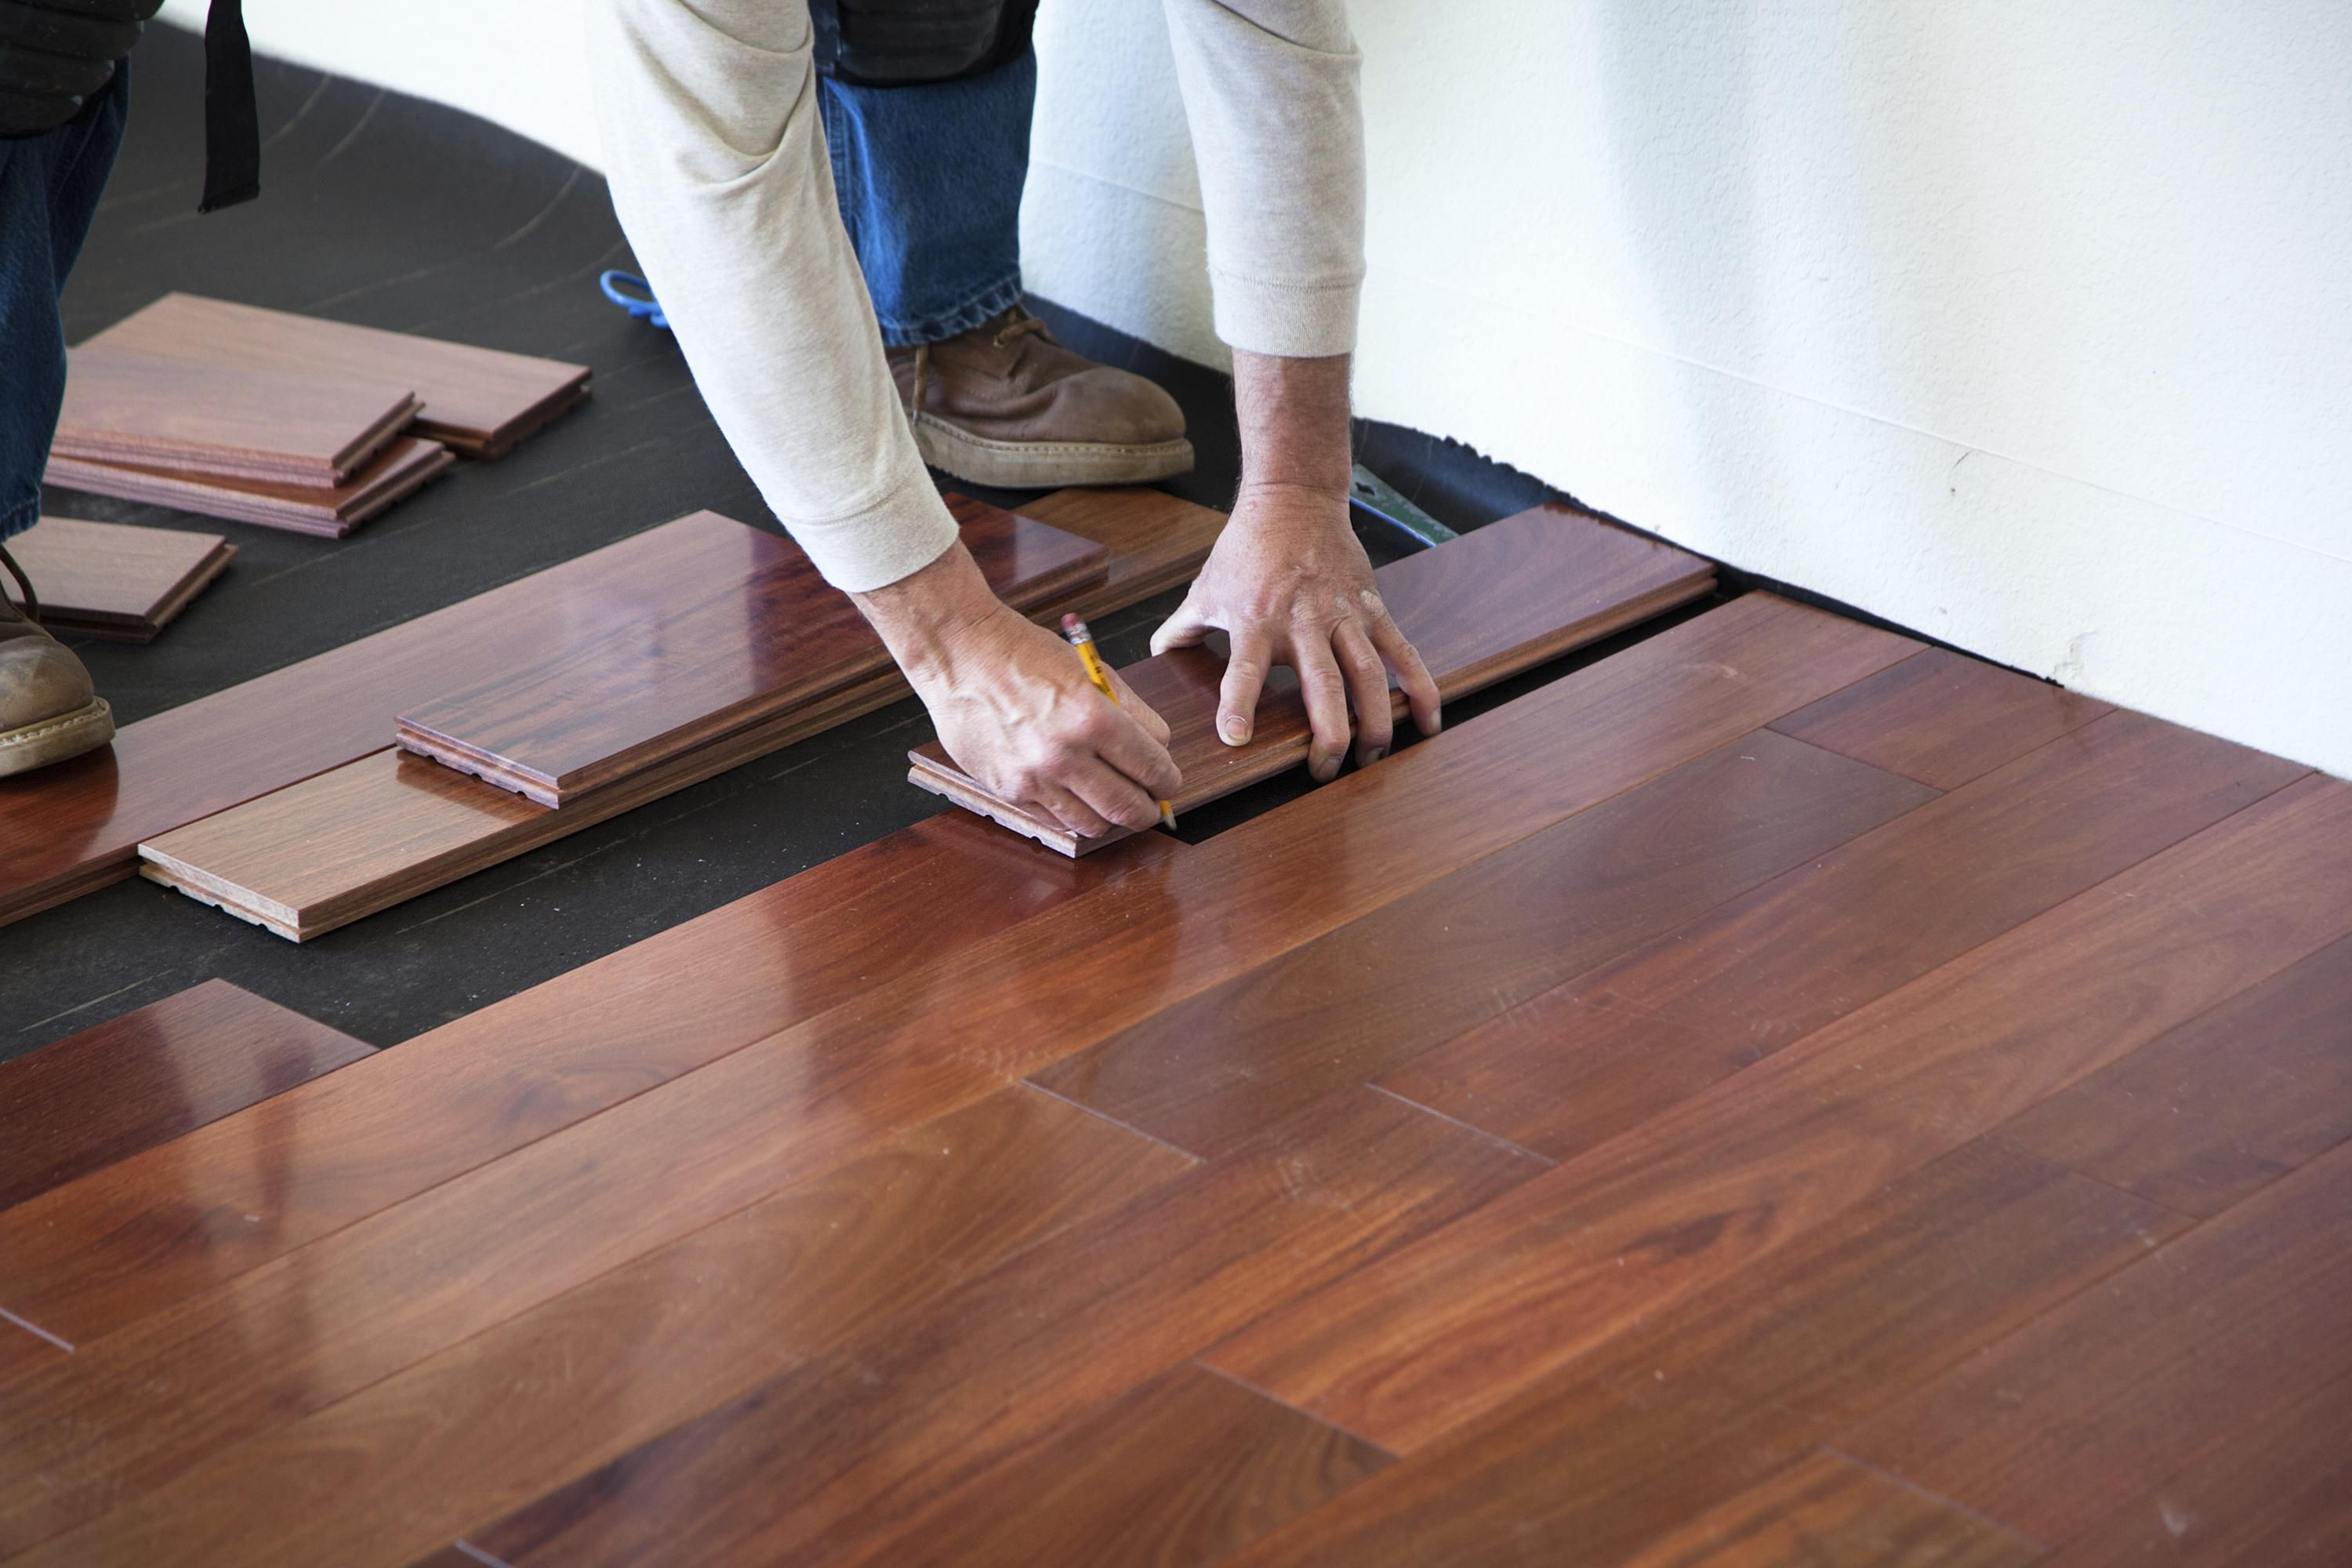 17 Fabulous How Much A Square Foot to Refinish Hardwood Floors 2024 free download how much a square foot to refinish hardwood floors of this is how much hardwood flooring to order intended for 170040982 56a49f213df78cf772834e21